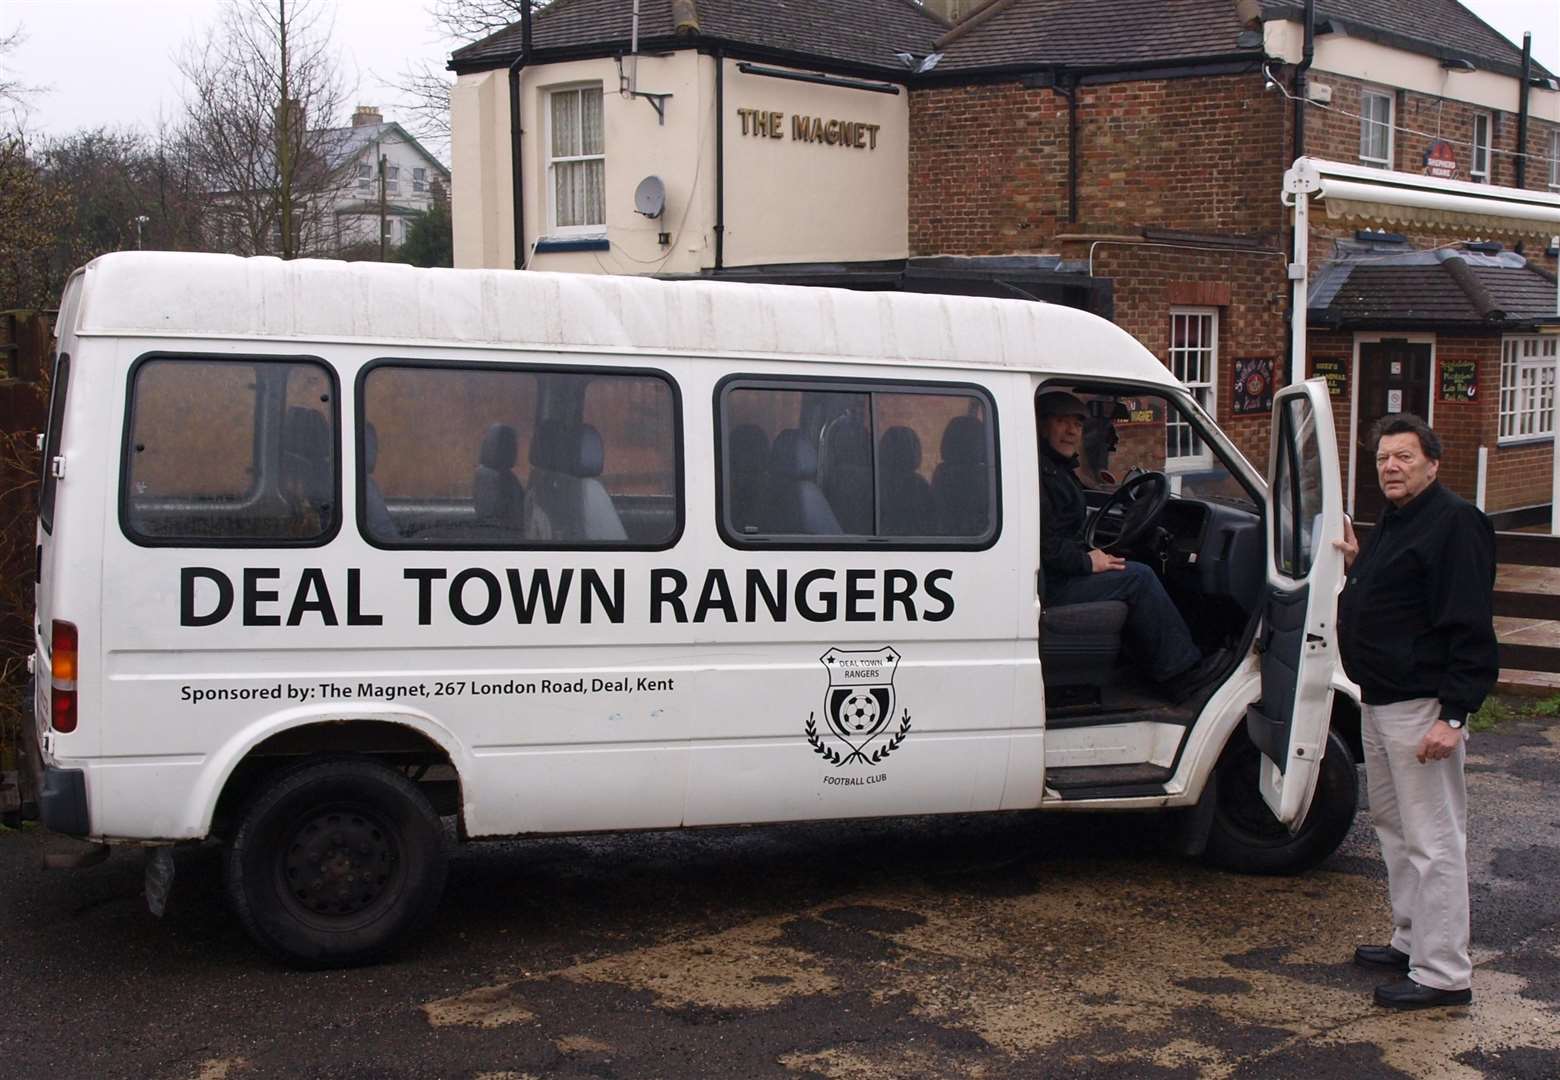 John Judd, on the right in 2011, sponsored the Deal Town Rangers minibus during his time at The Magnet